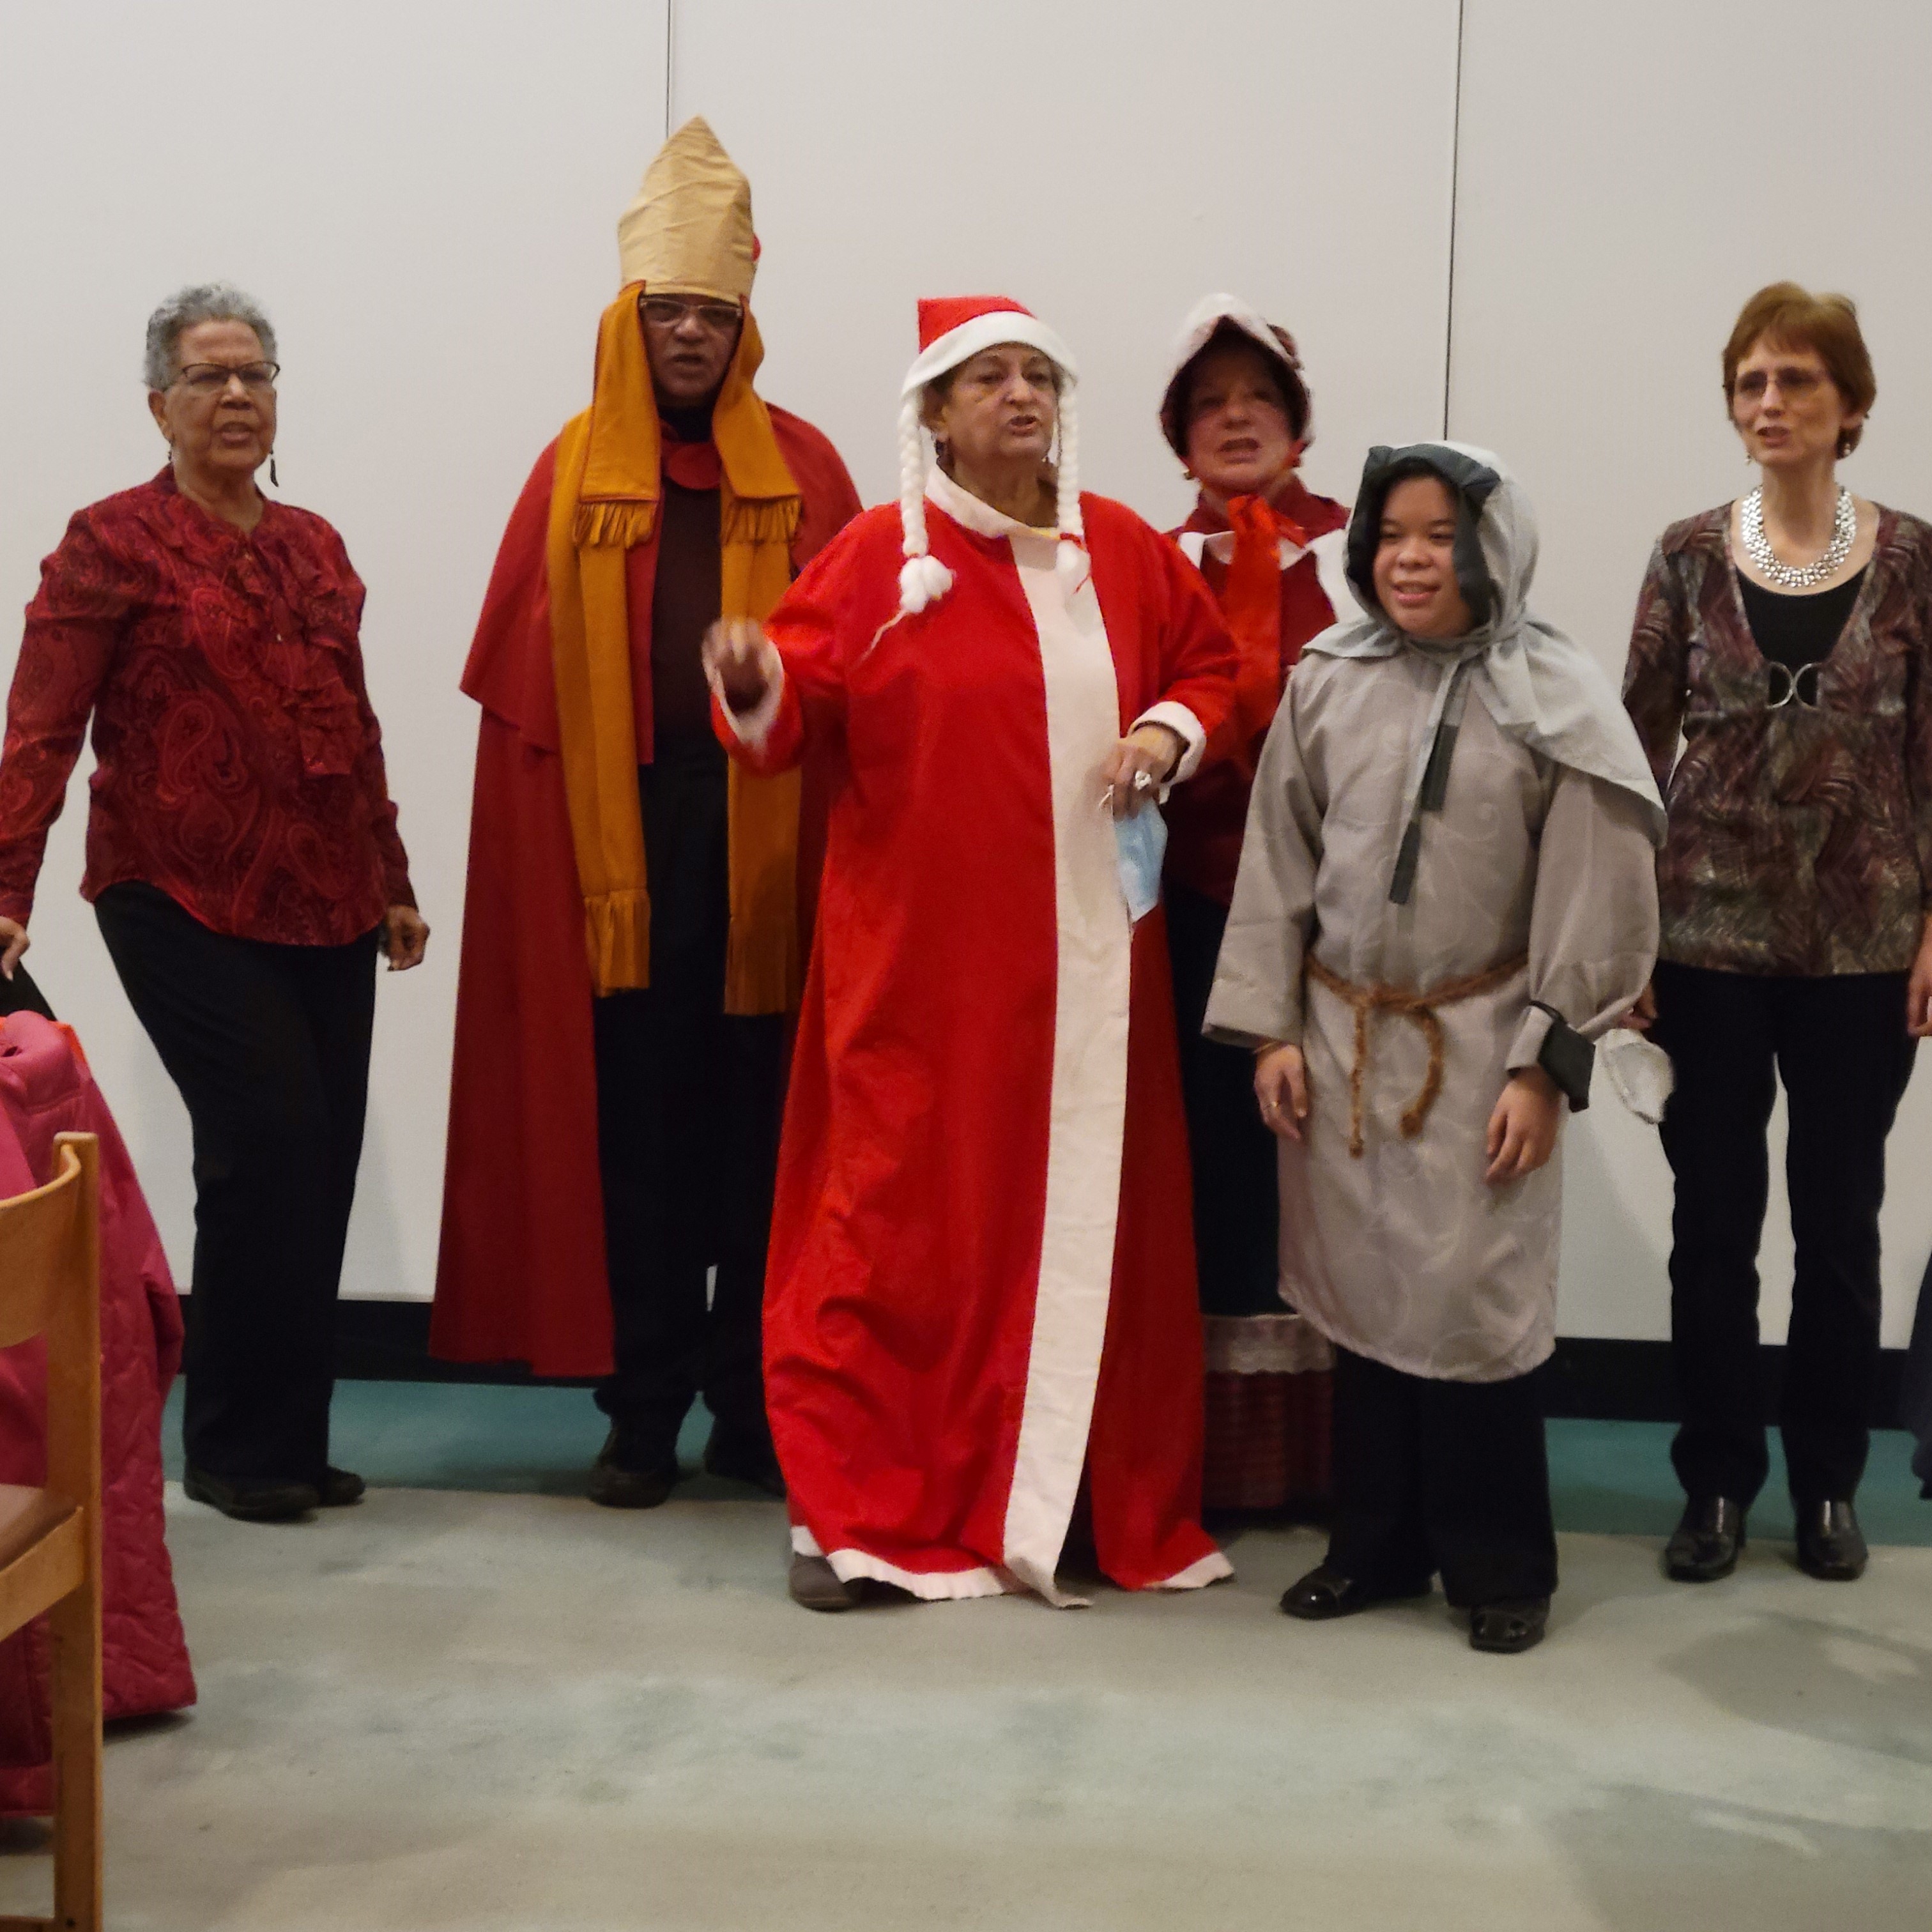 Participants dressed as Mrs Claus, a wise man, and elf, and a shepherd